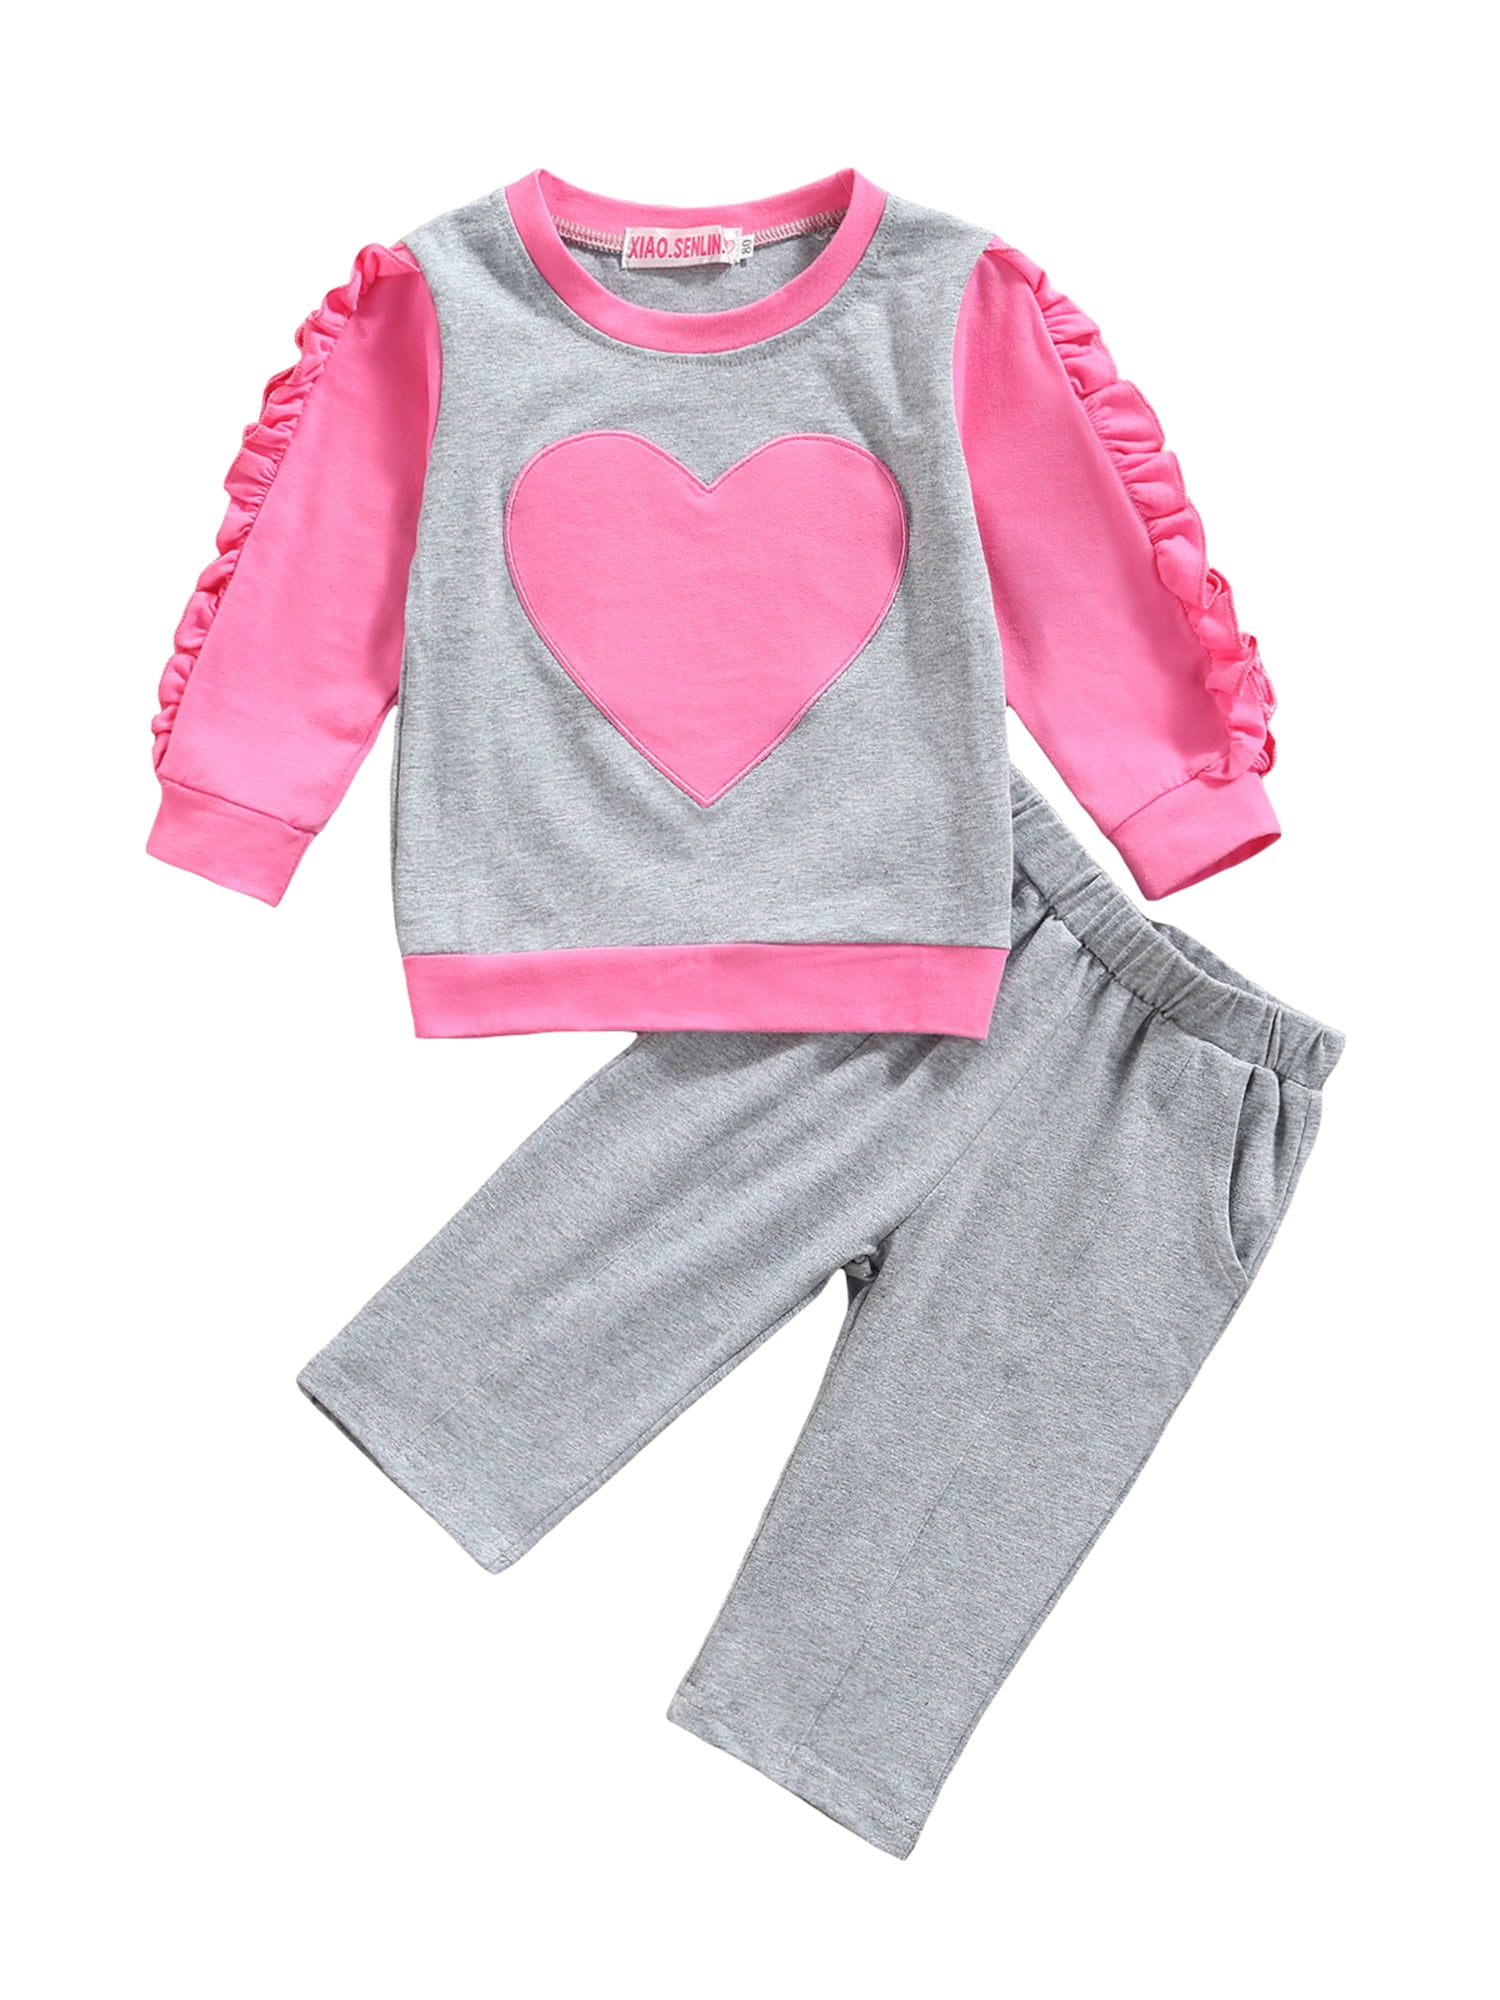 Londony ♥‿◕ Clearance Sales,Baby Girl Long Sleeve Rabbit Print Pullover Tops Loving Heart Pants Set for Toddler Kids 